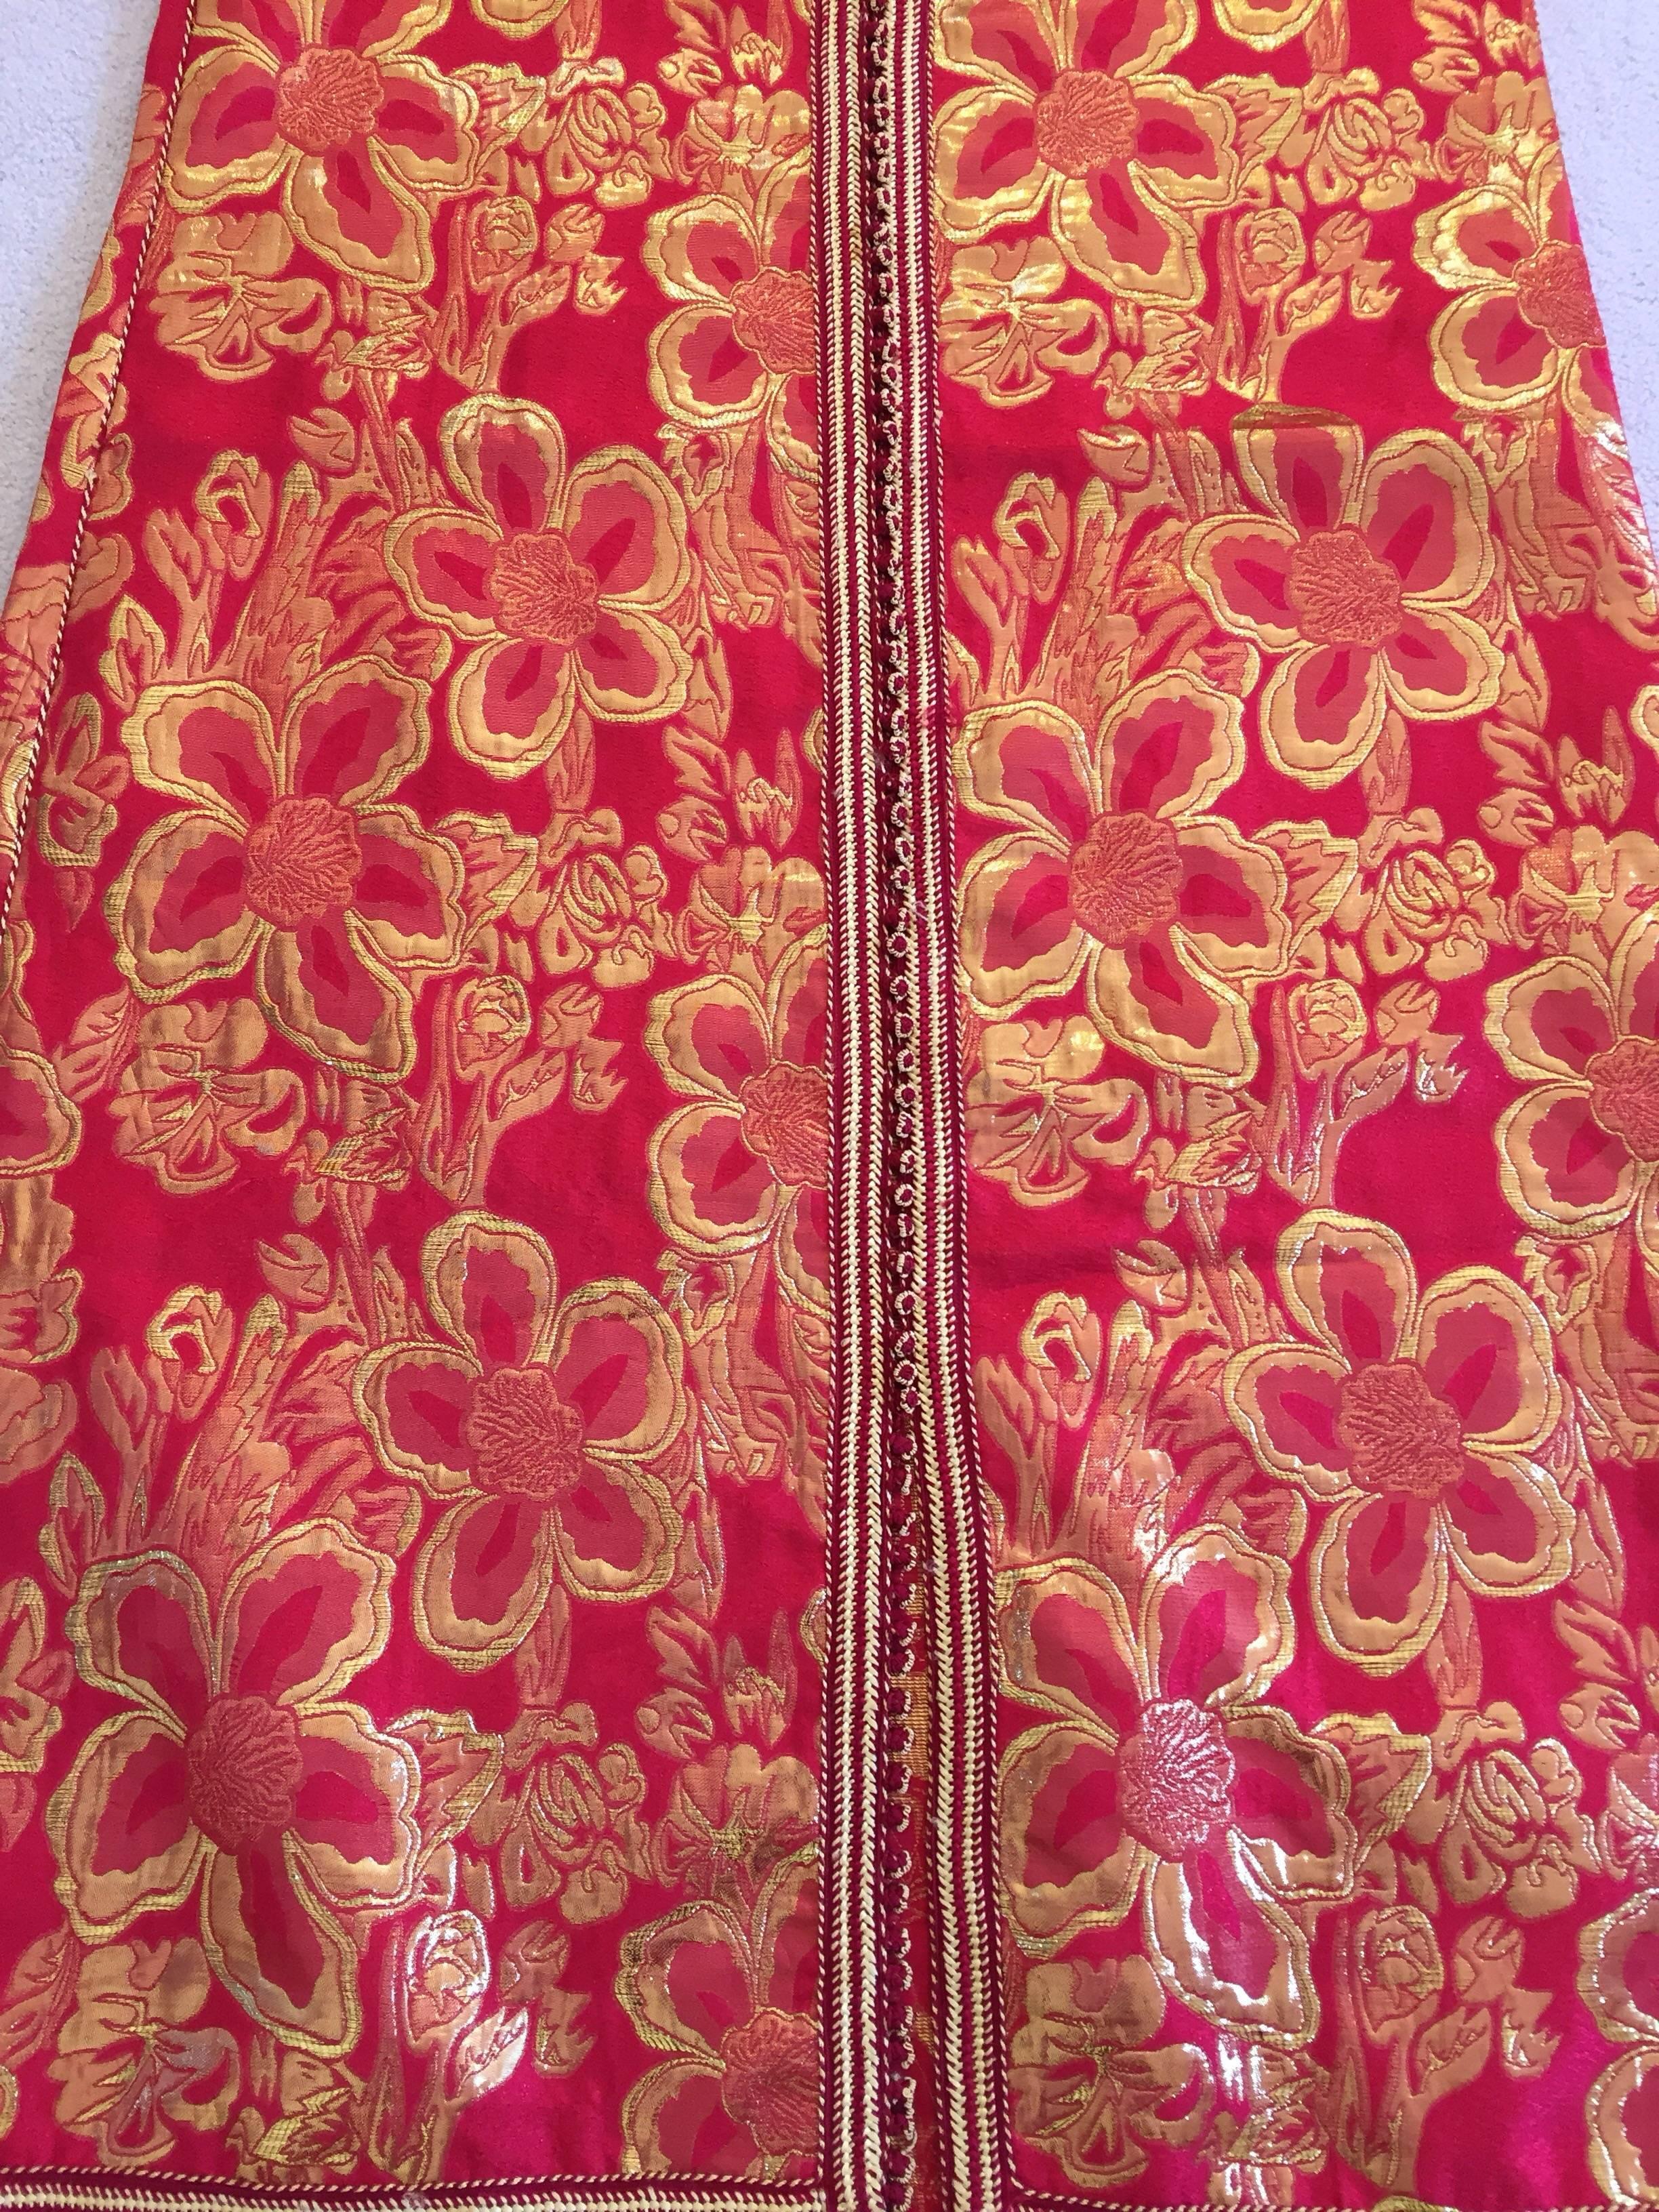 Vintage Moroccan Kaftan 1970s Red and Gold Floral Brocade Caftan Maxi Dress For Sale 3